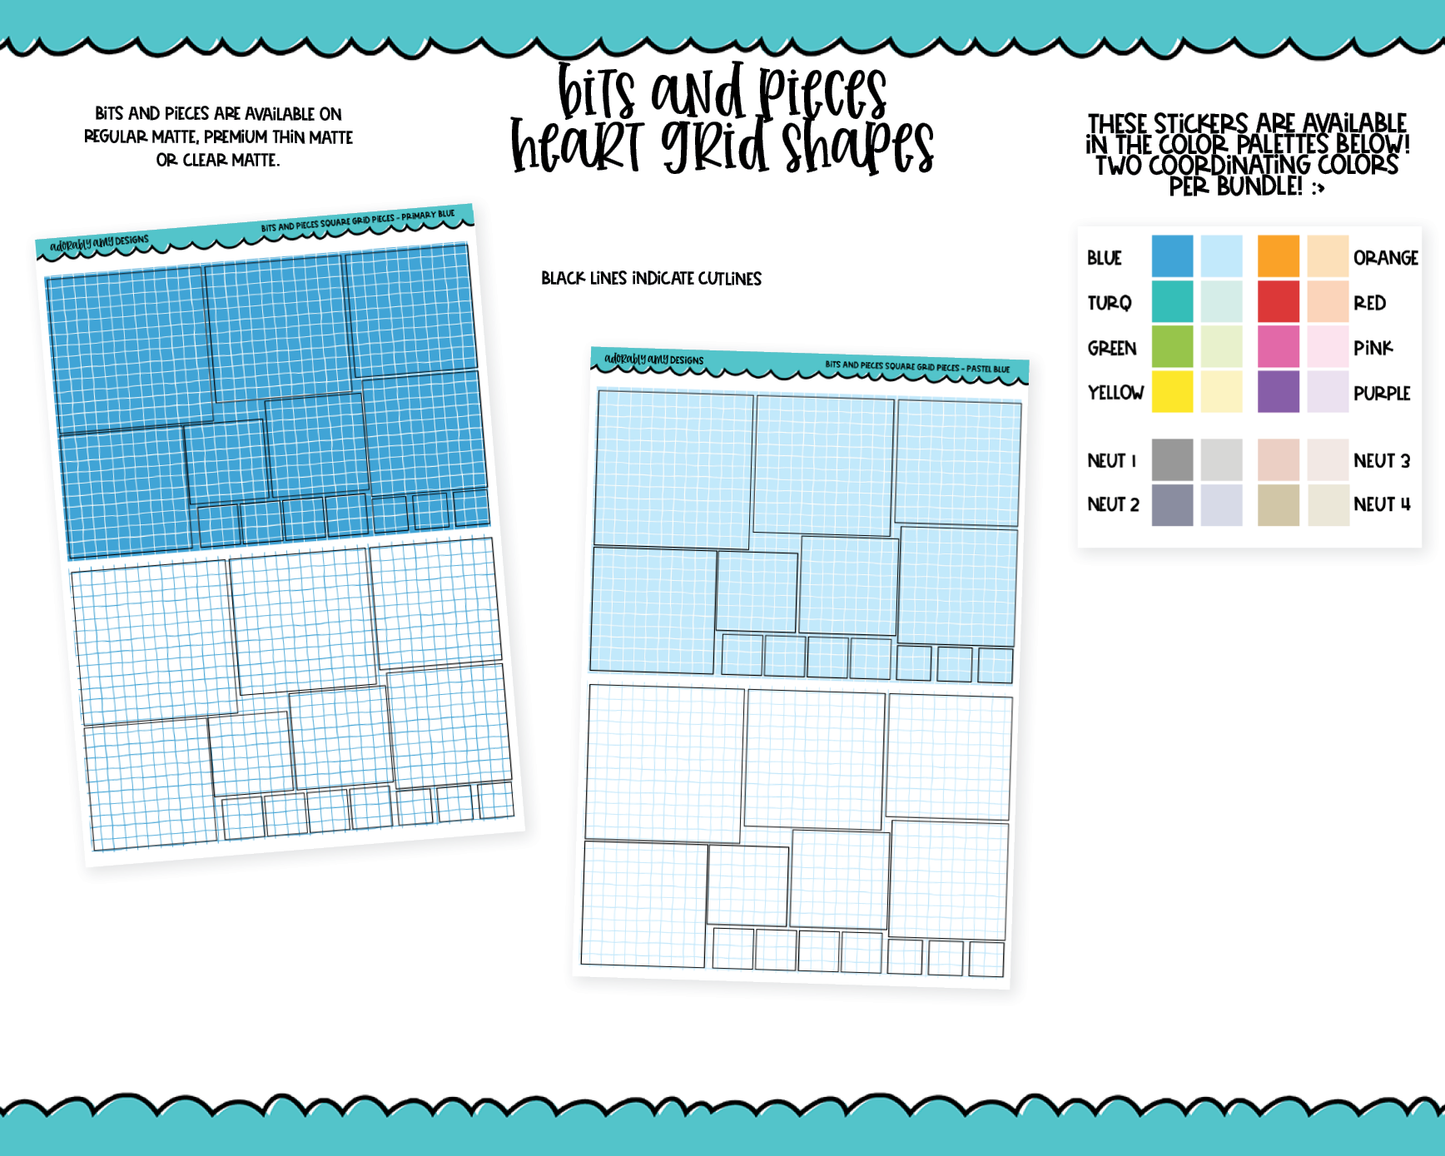 Bits & Pieces Square Grid Shapes Kit Addons for Any Planner in 13 different Color Schemes